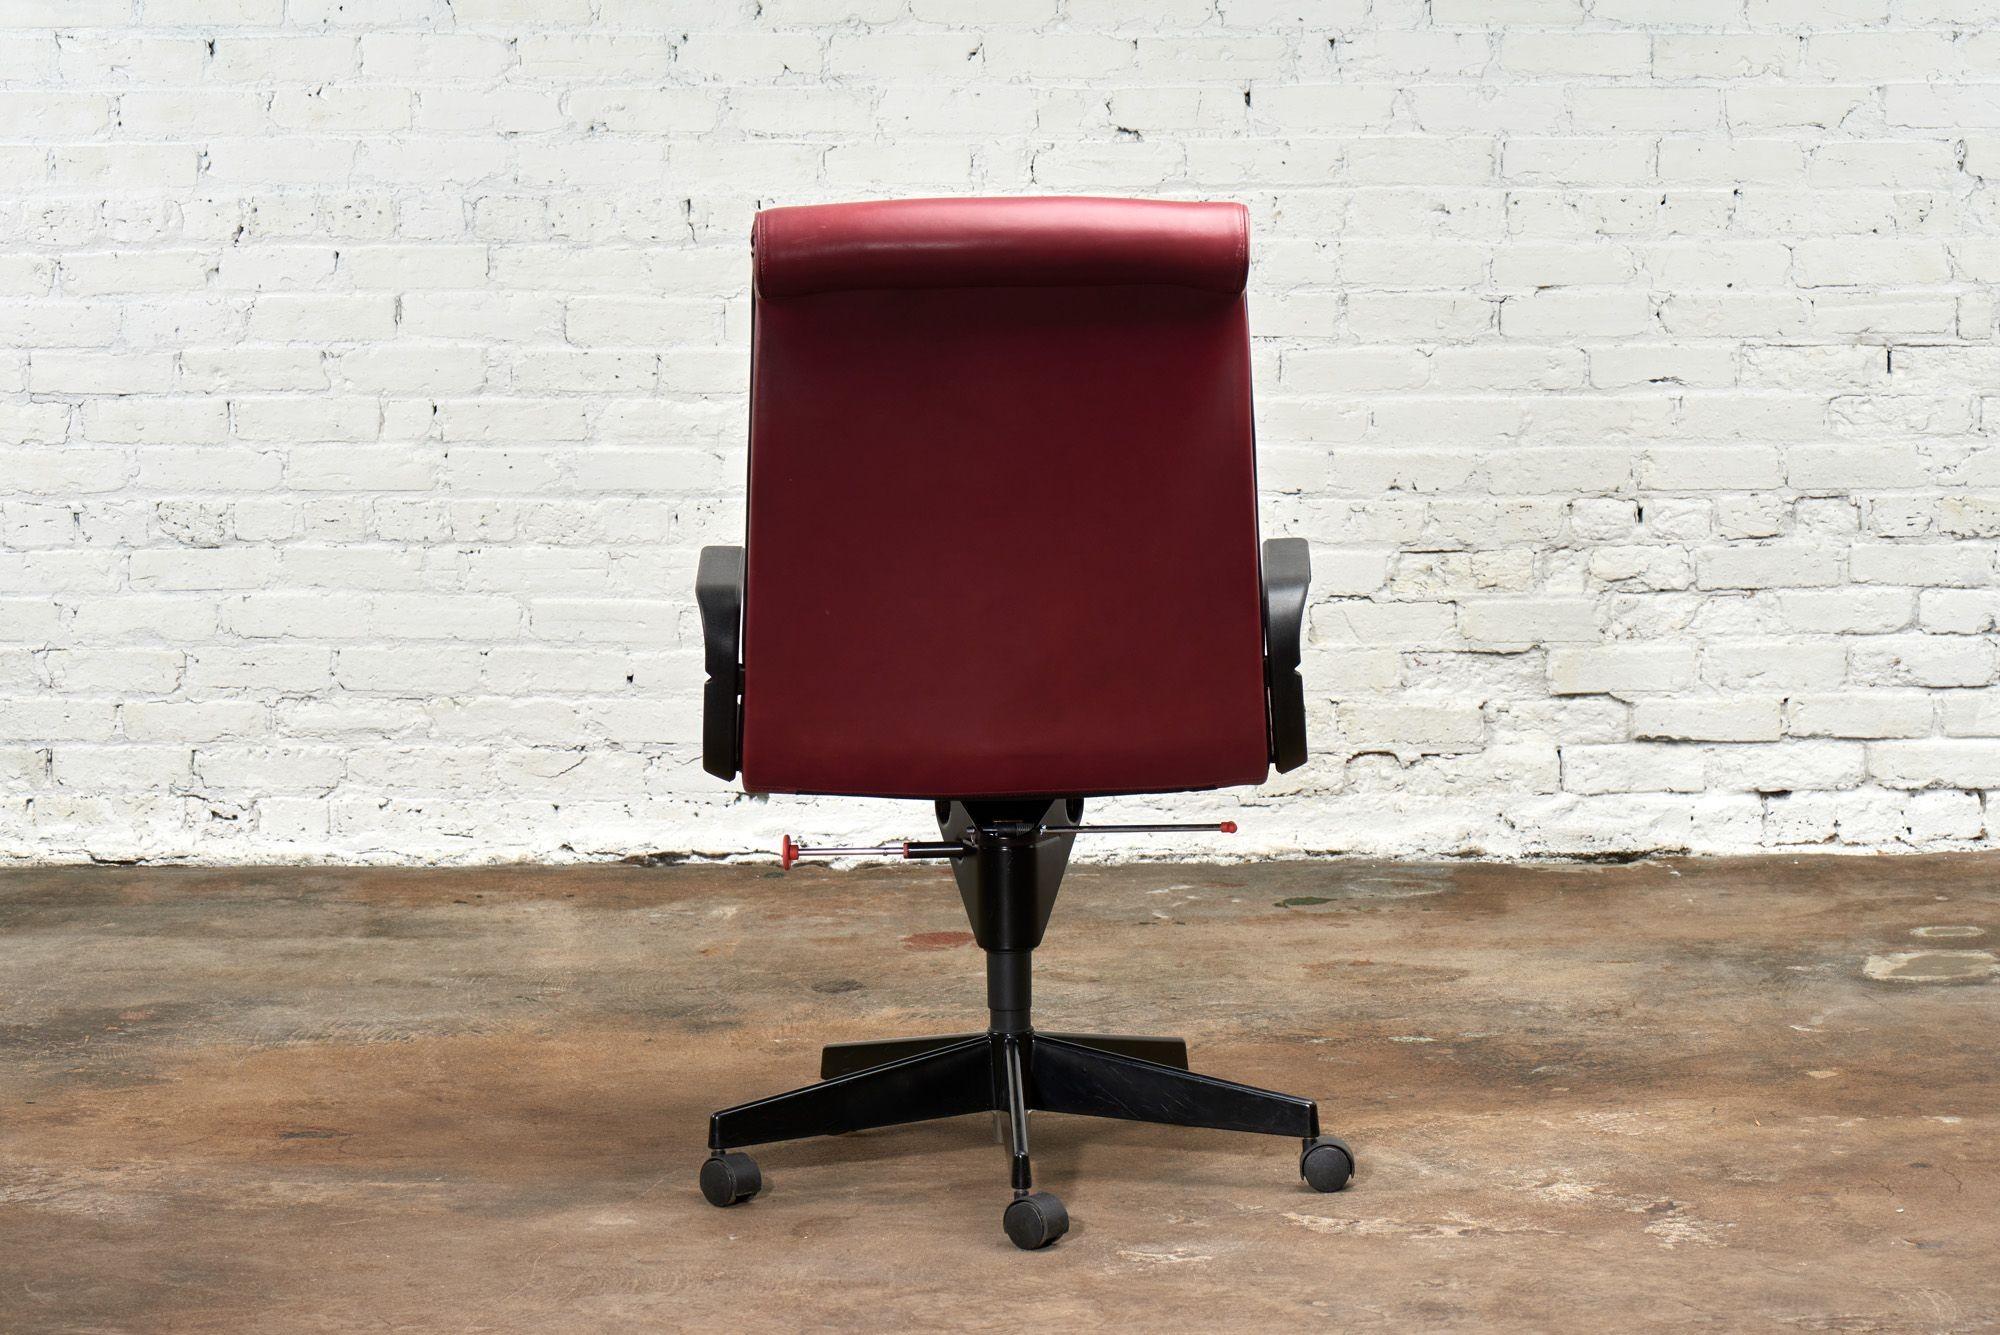 French Red Leather Desk Chair by Richard Sapper for Knoll Inc/Knoll Intl, France 1992 For Sale